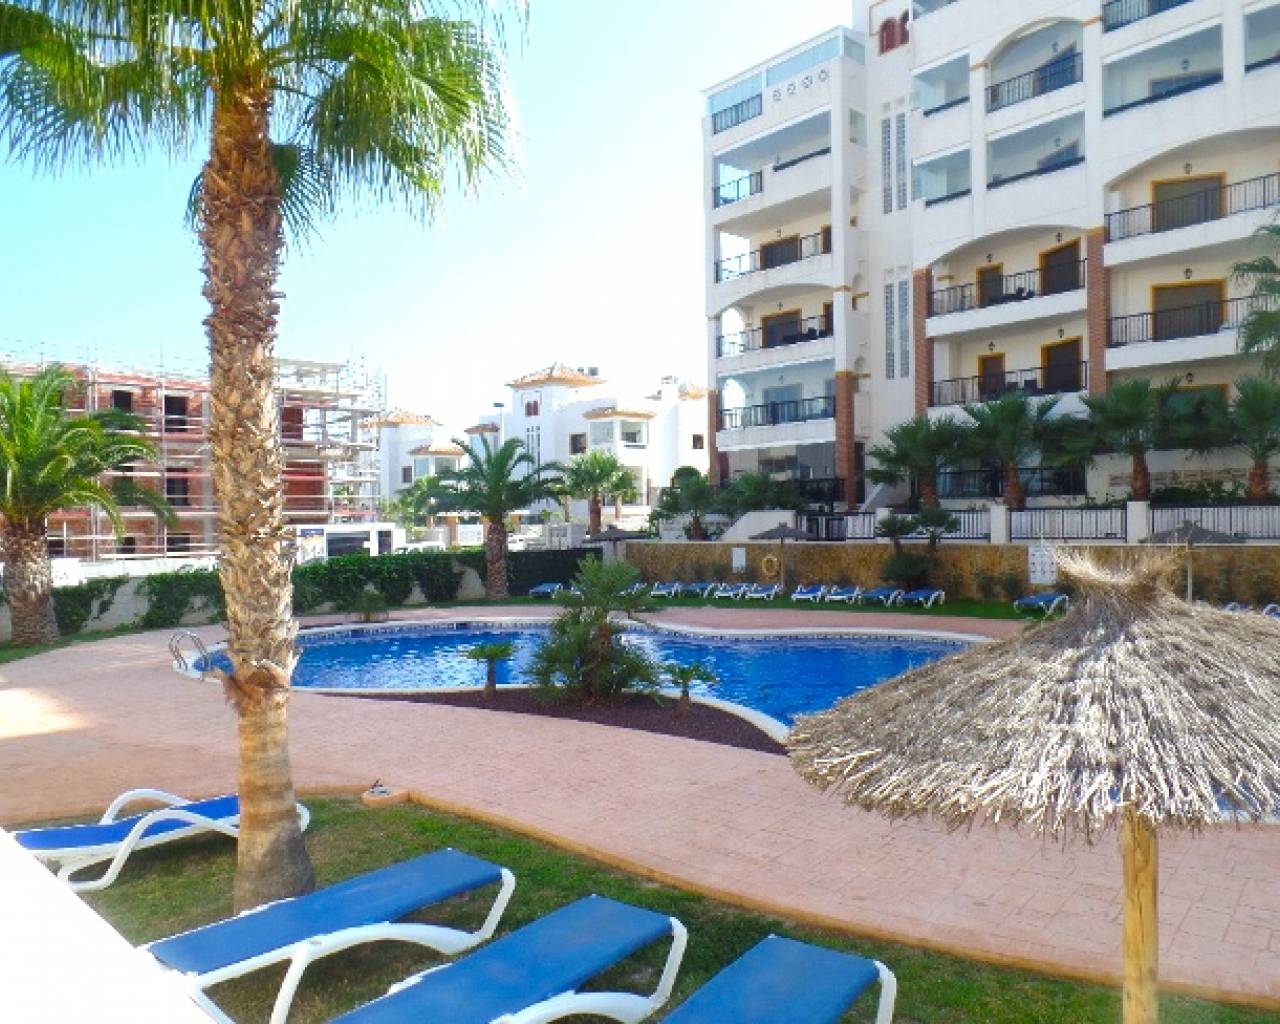 pool area within marjal beach properties for sale in guardamar